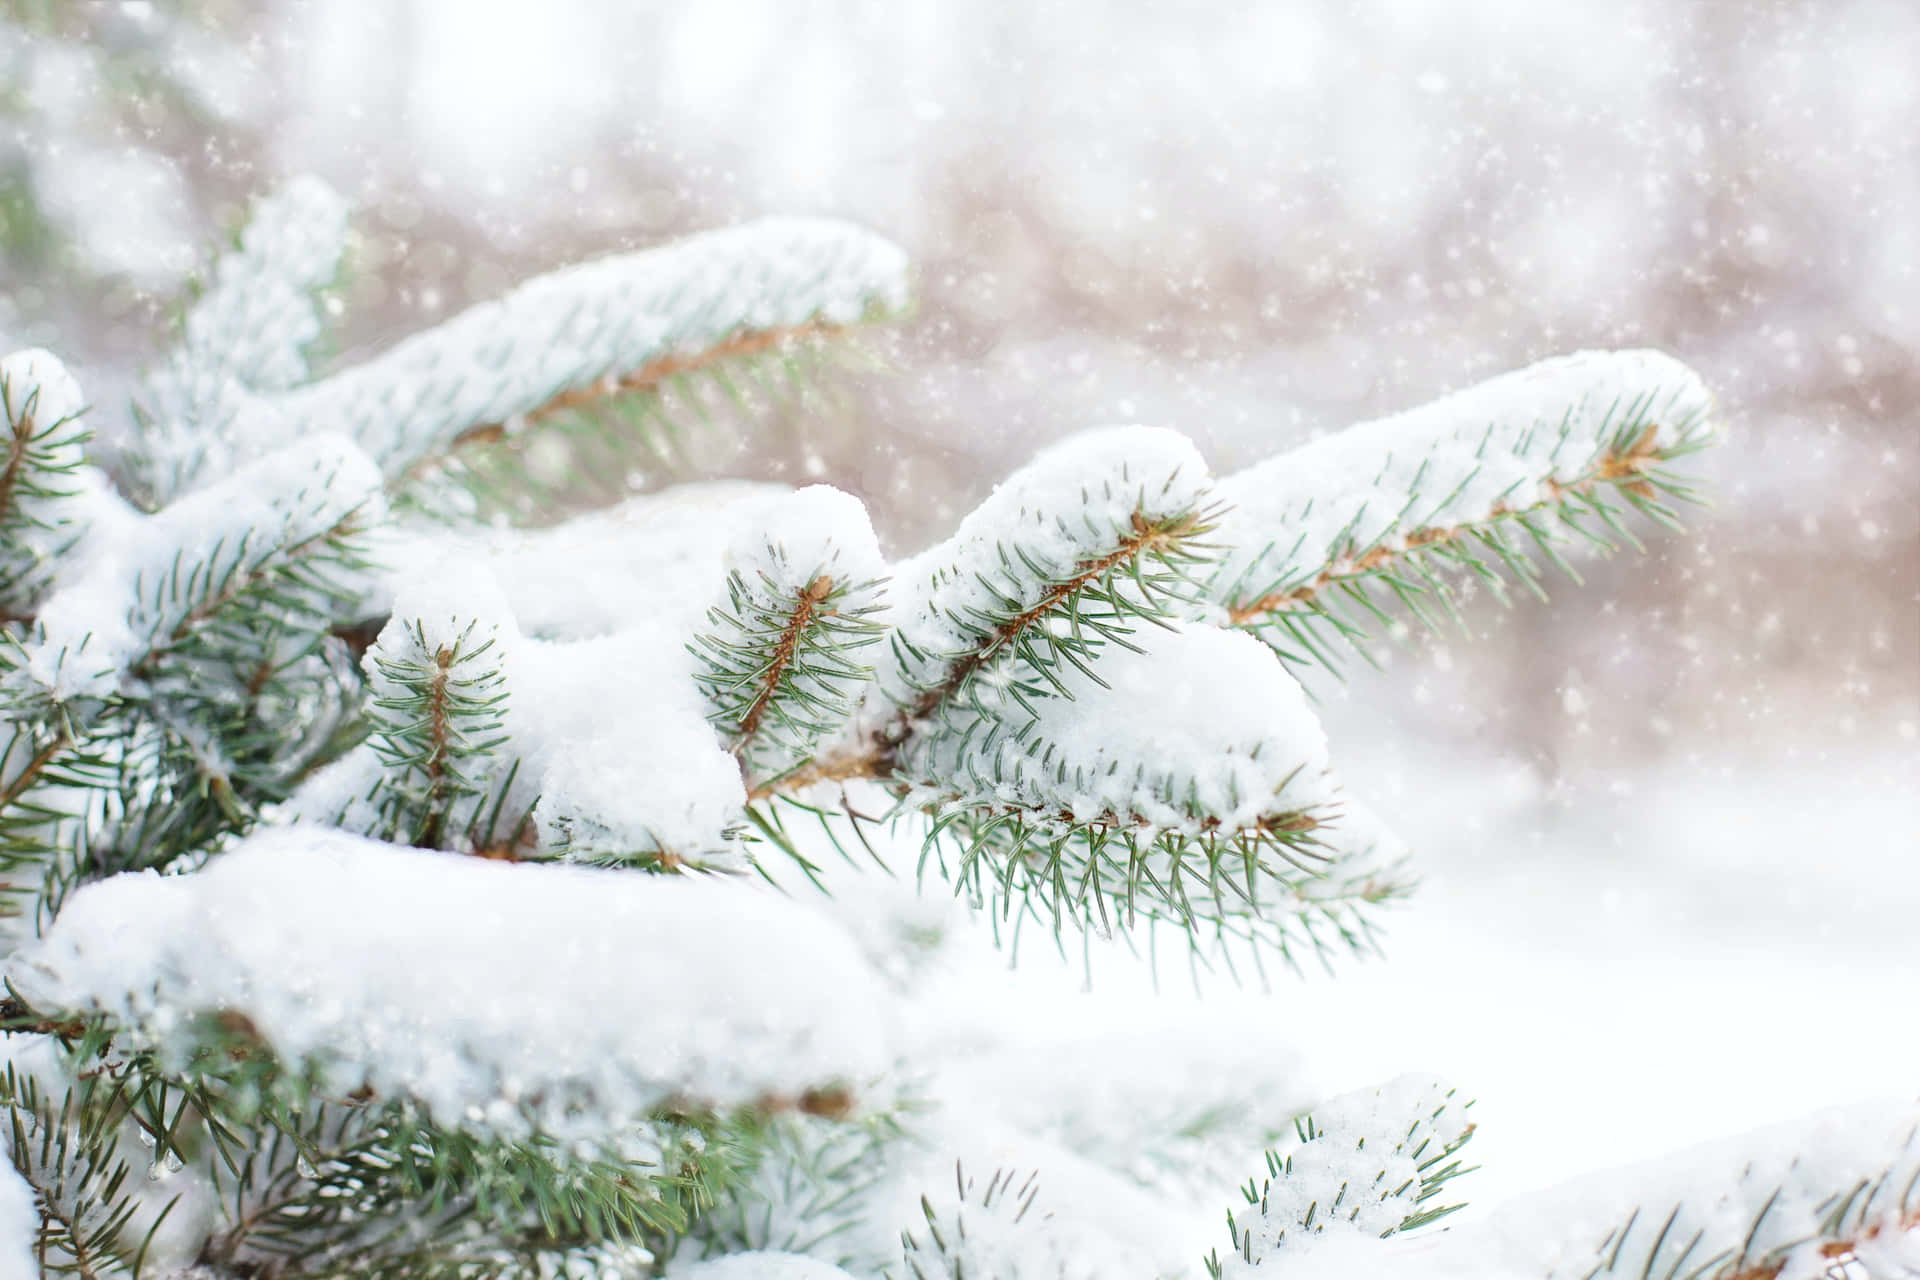 Snowy Pine Branches For Snow Background